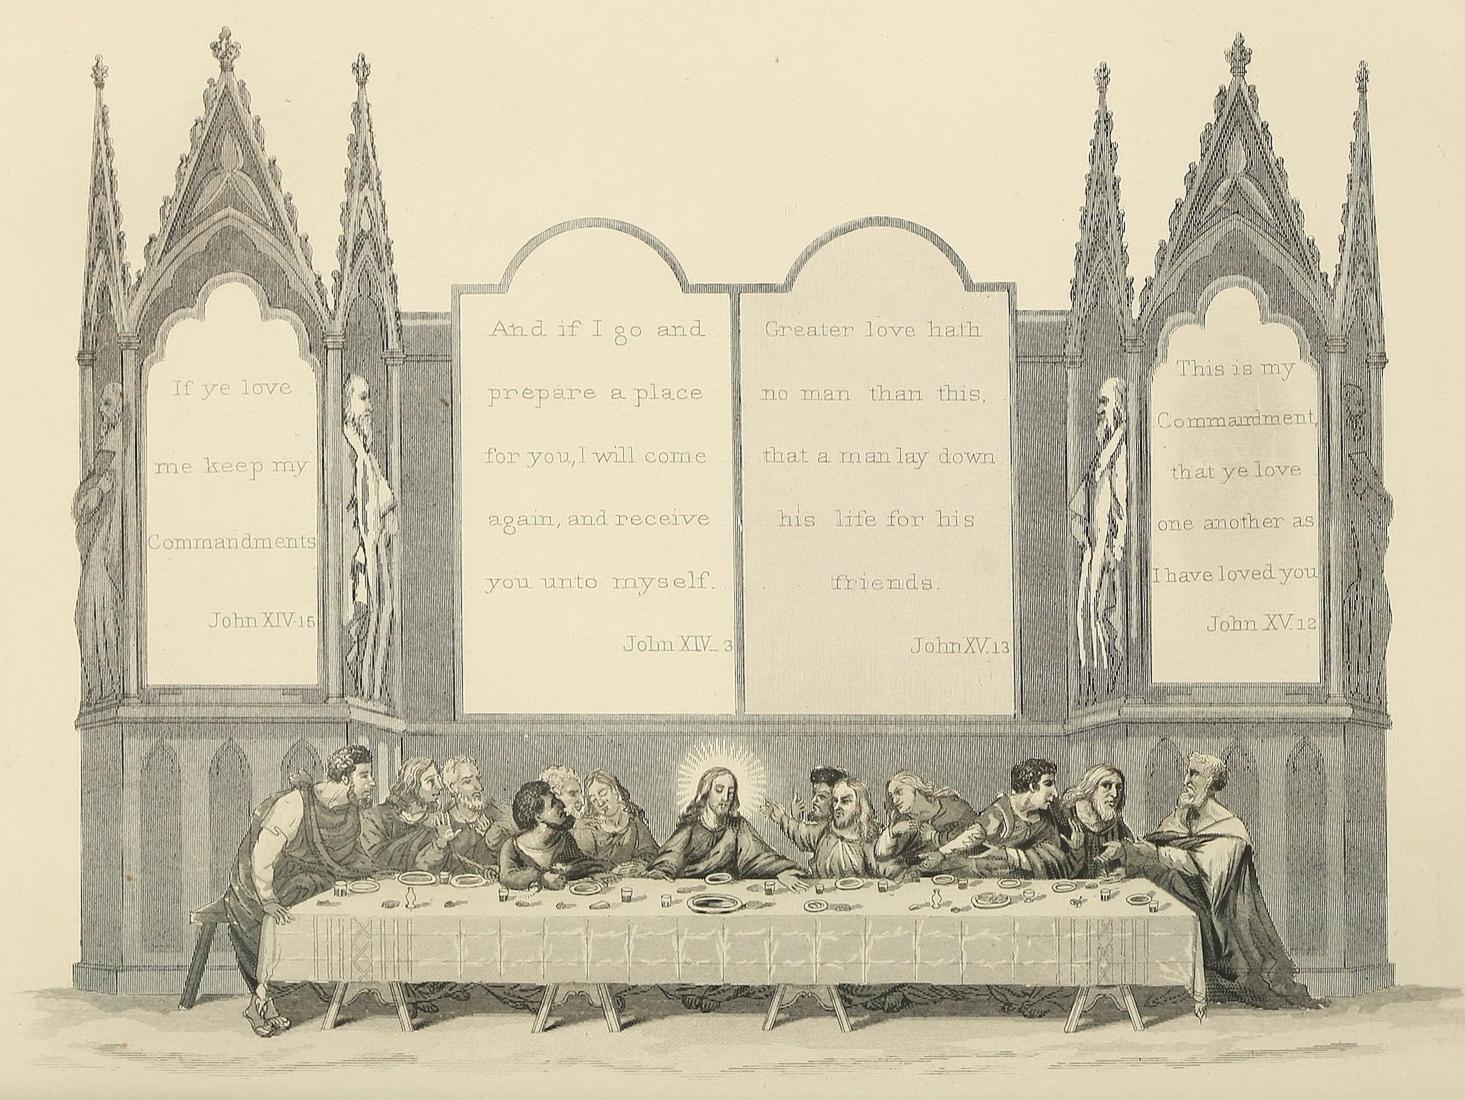 (‡ The Last Supper)